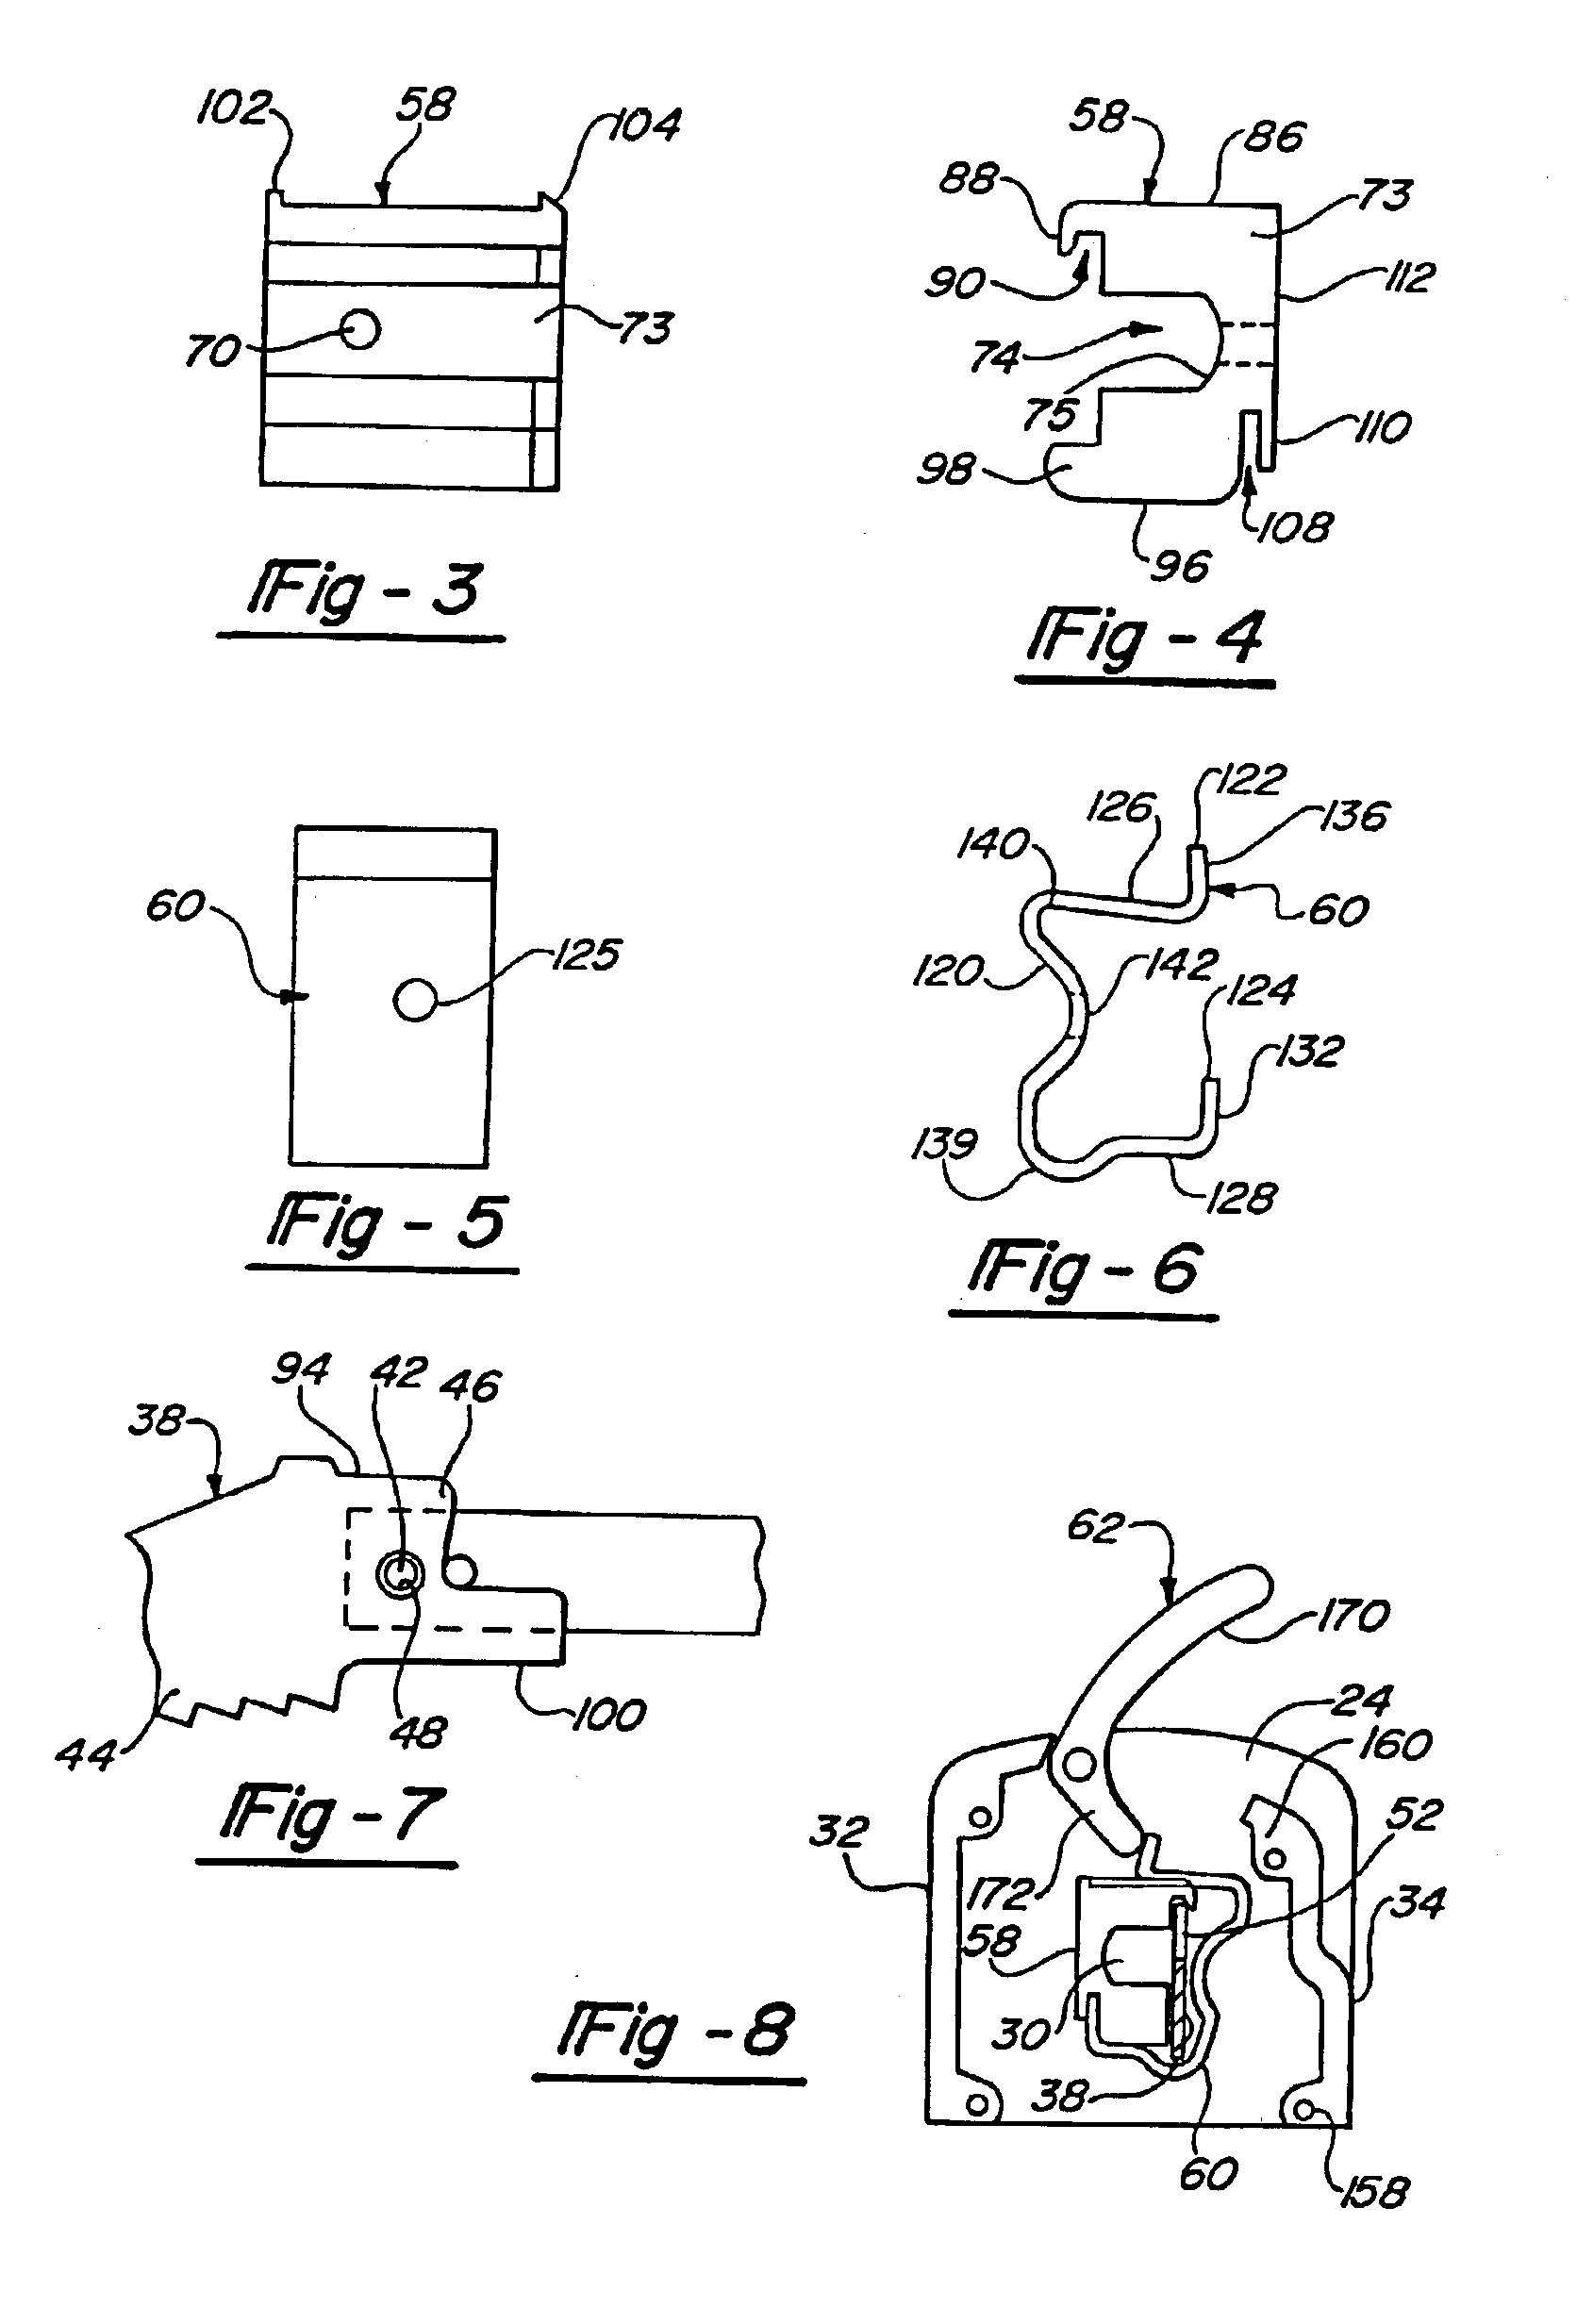 Clamping arrangement for receiving a saw blade